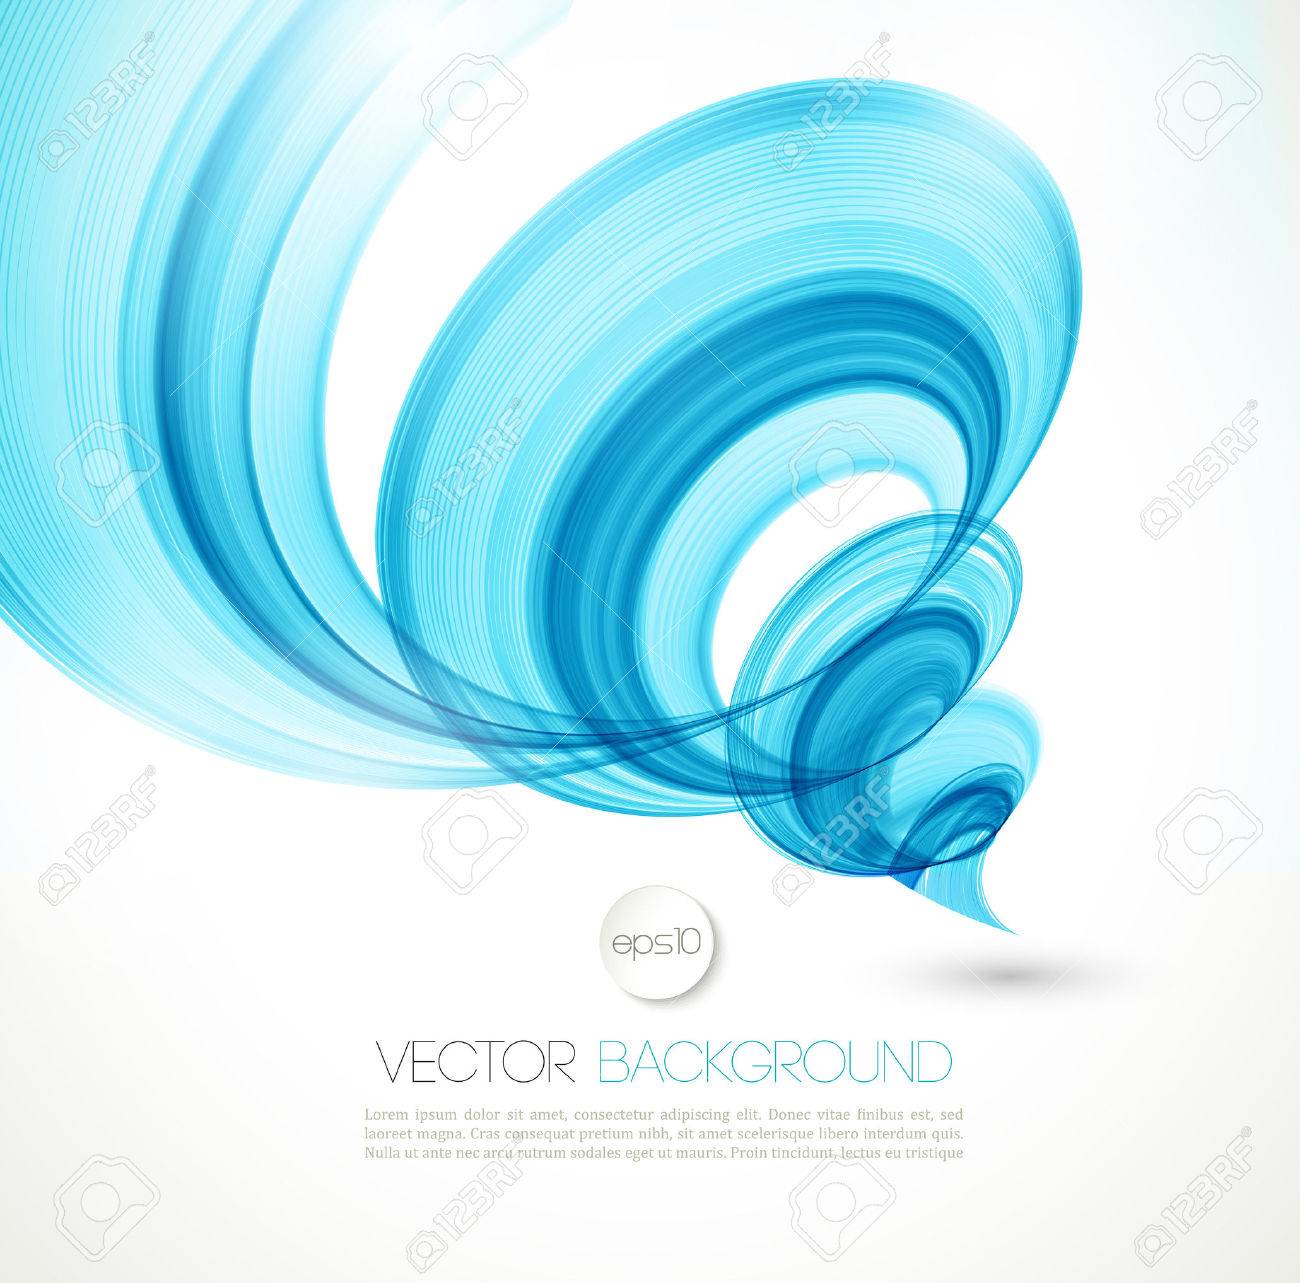 Vector Abstract Twist Waves Background Template Brochure Design